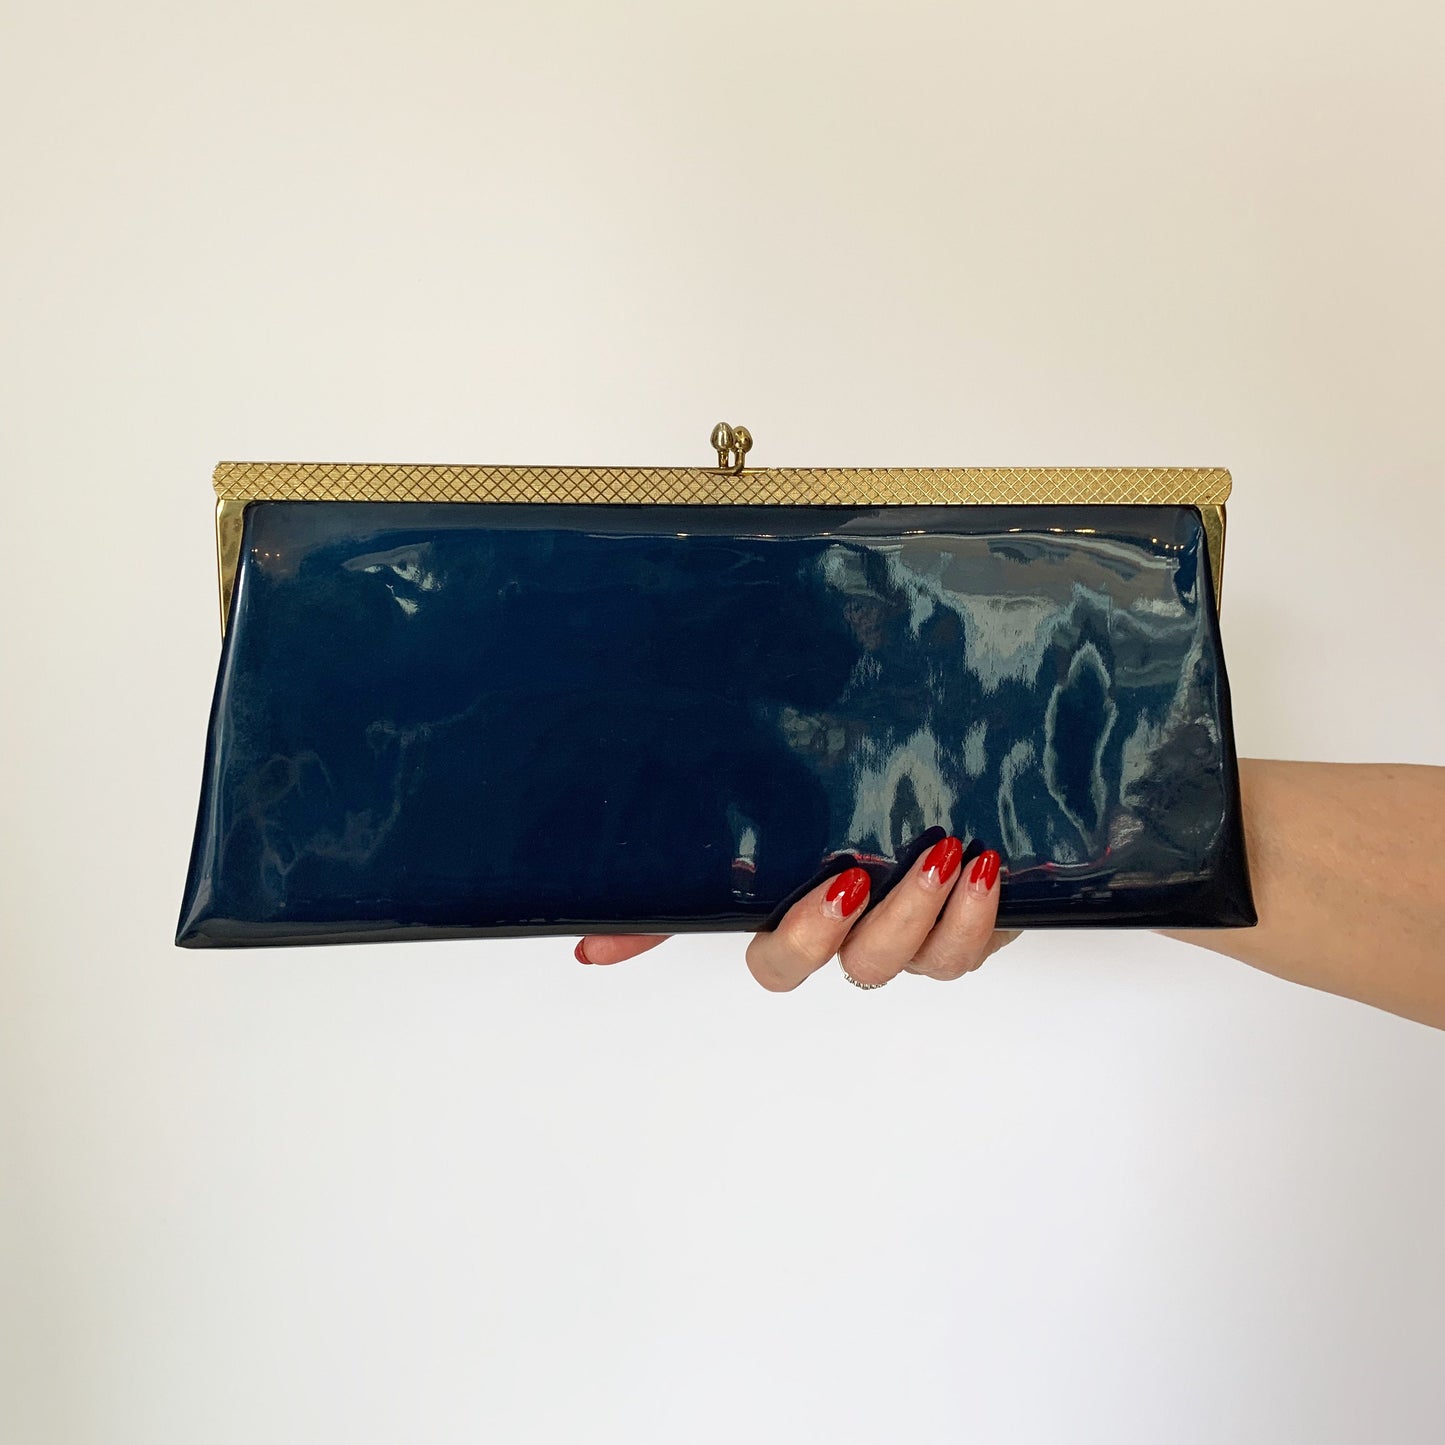 1960s Navy Blue Patent Leather Clutch Bag